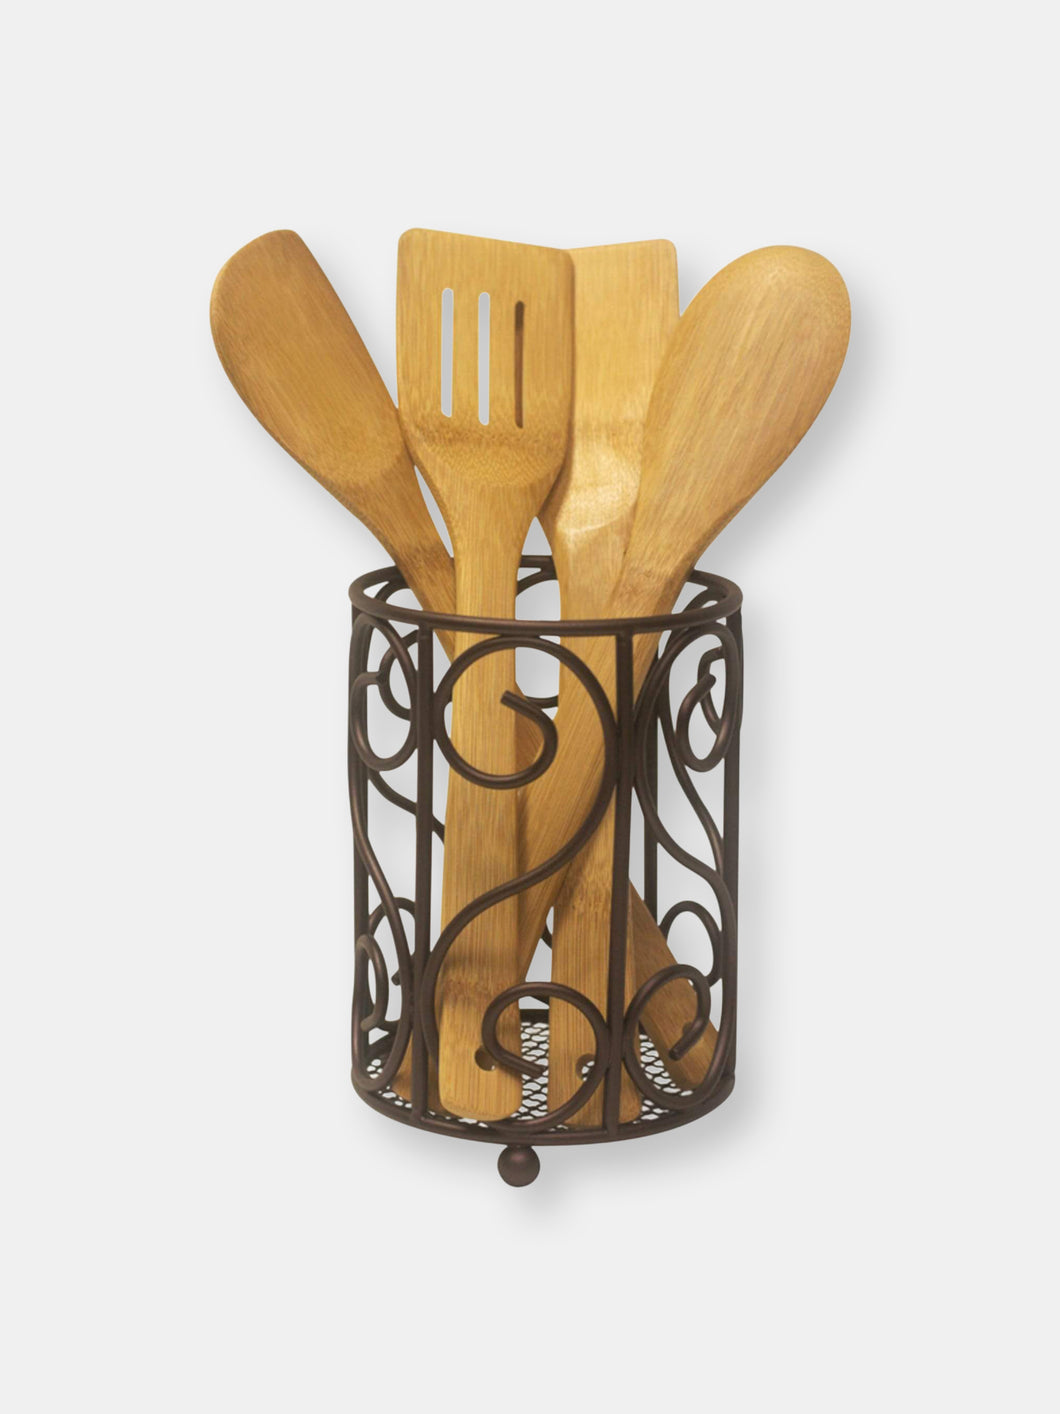 Scroll Collection Steel Cutlery Holder with Mesh Bottom and Non-Skid Feet, Bronze